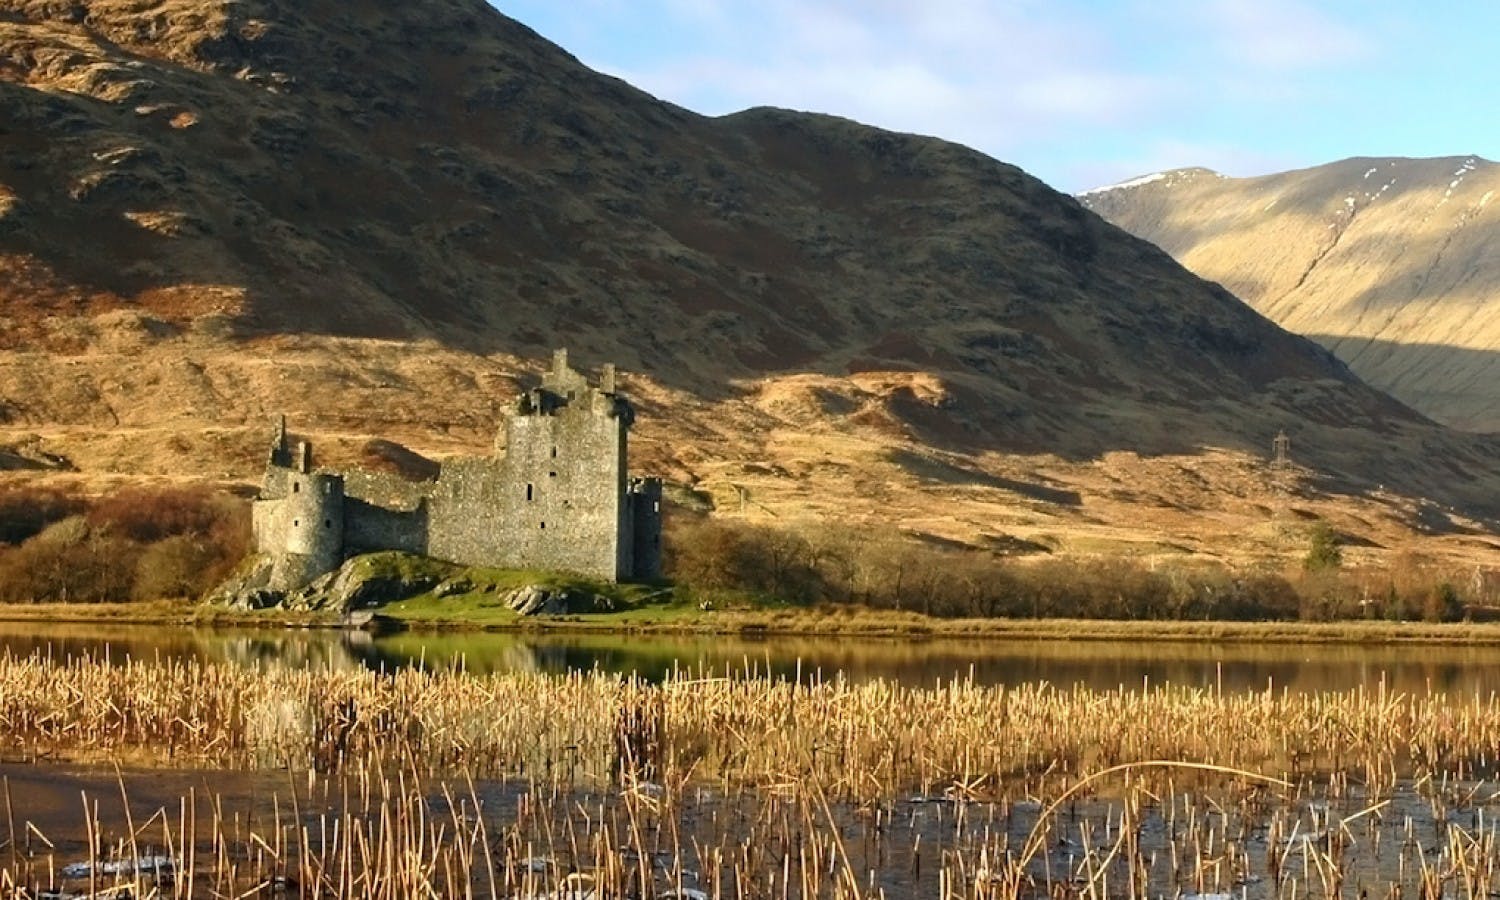 Day Trip to the West Highland Lochs, Mountains & Castles from Edinburgh